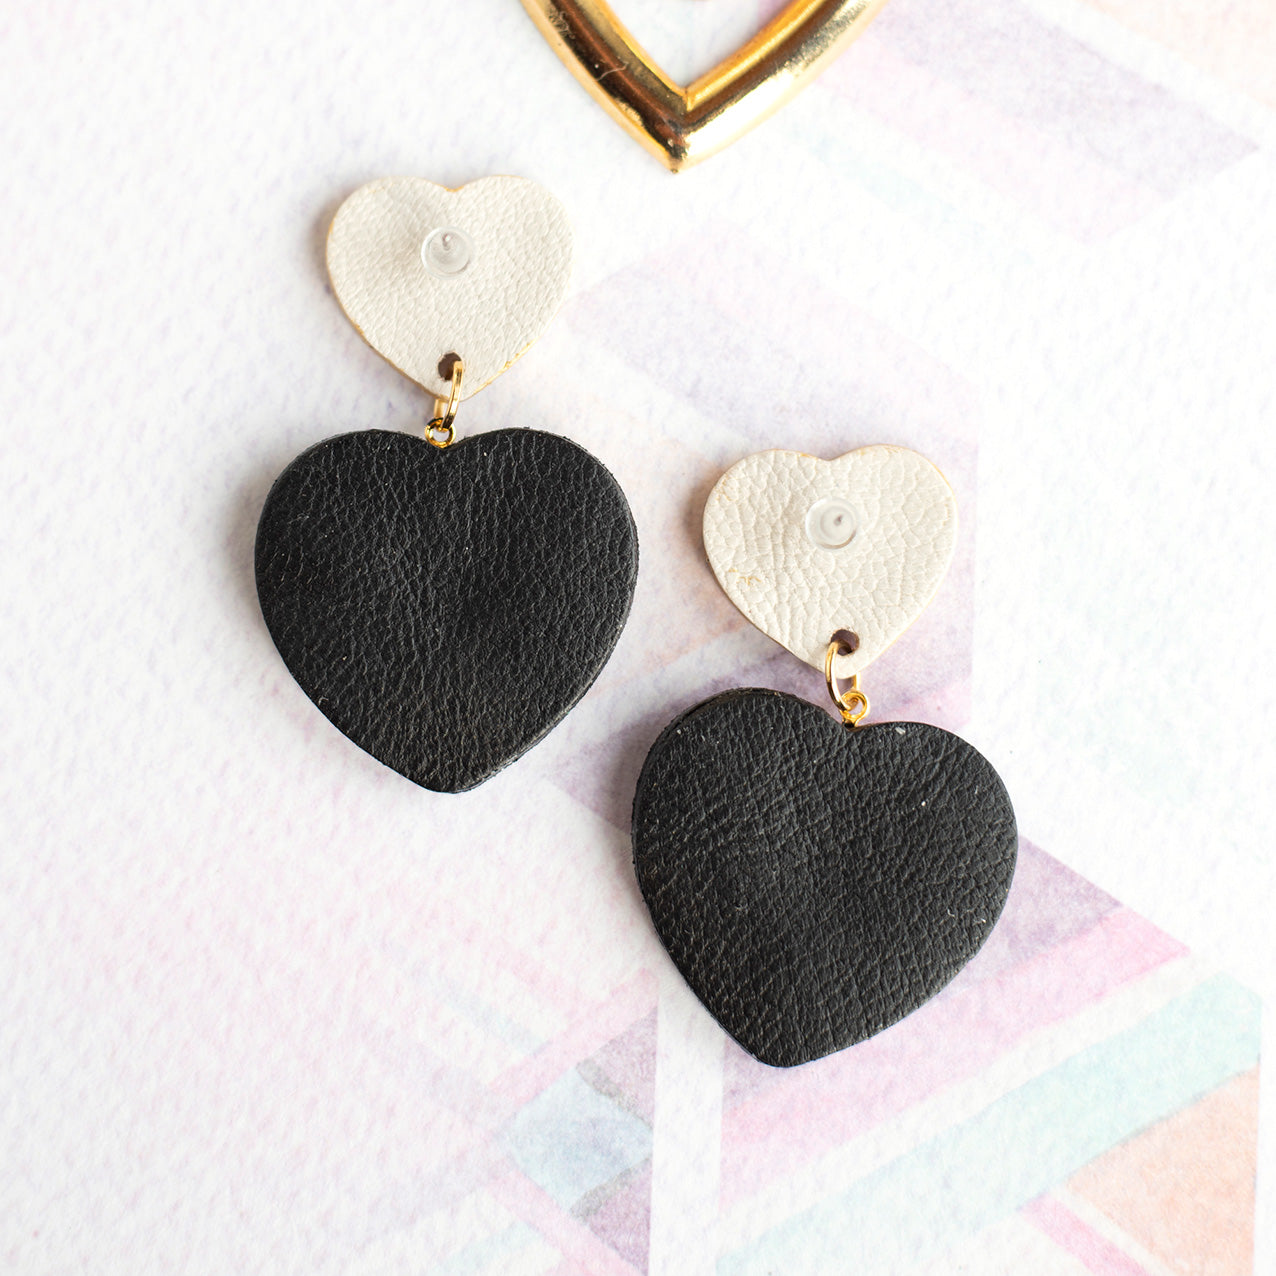 Sacré Coeur gold leather and midnight blue glitter earrings